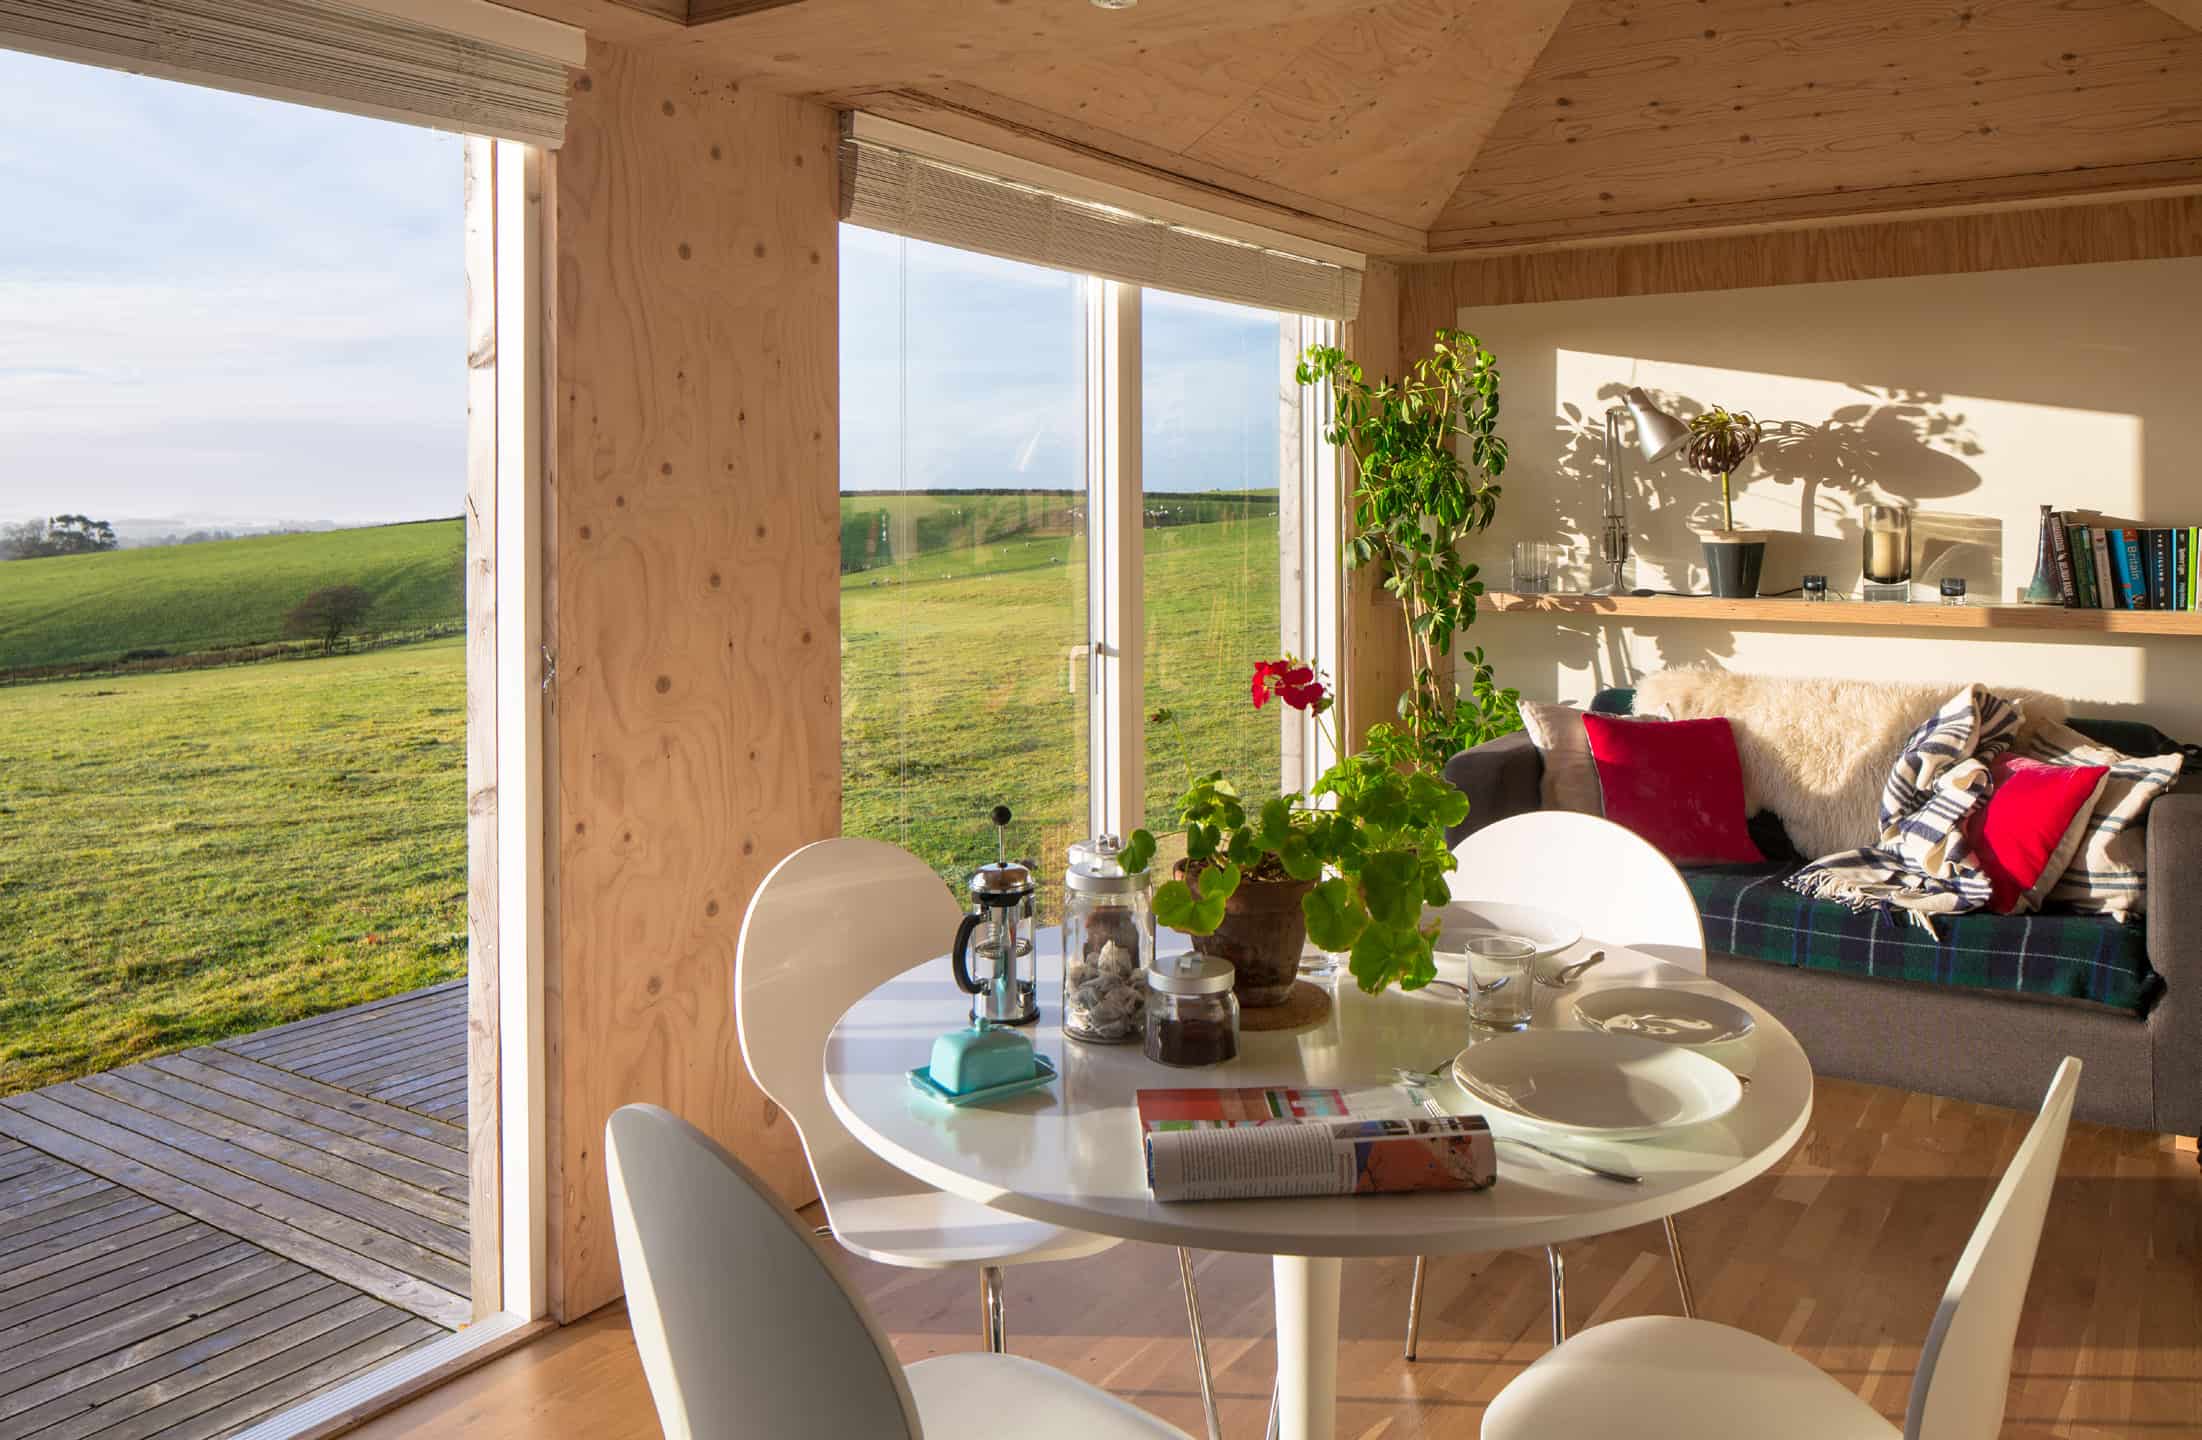 A dining table with wide windows overlooking a rural landscape.